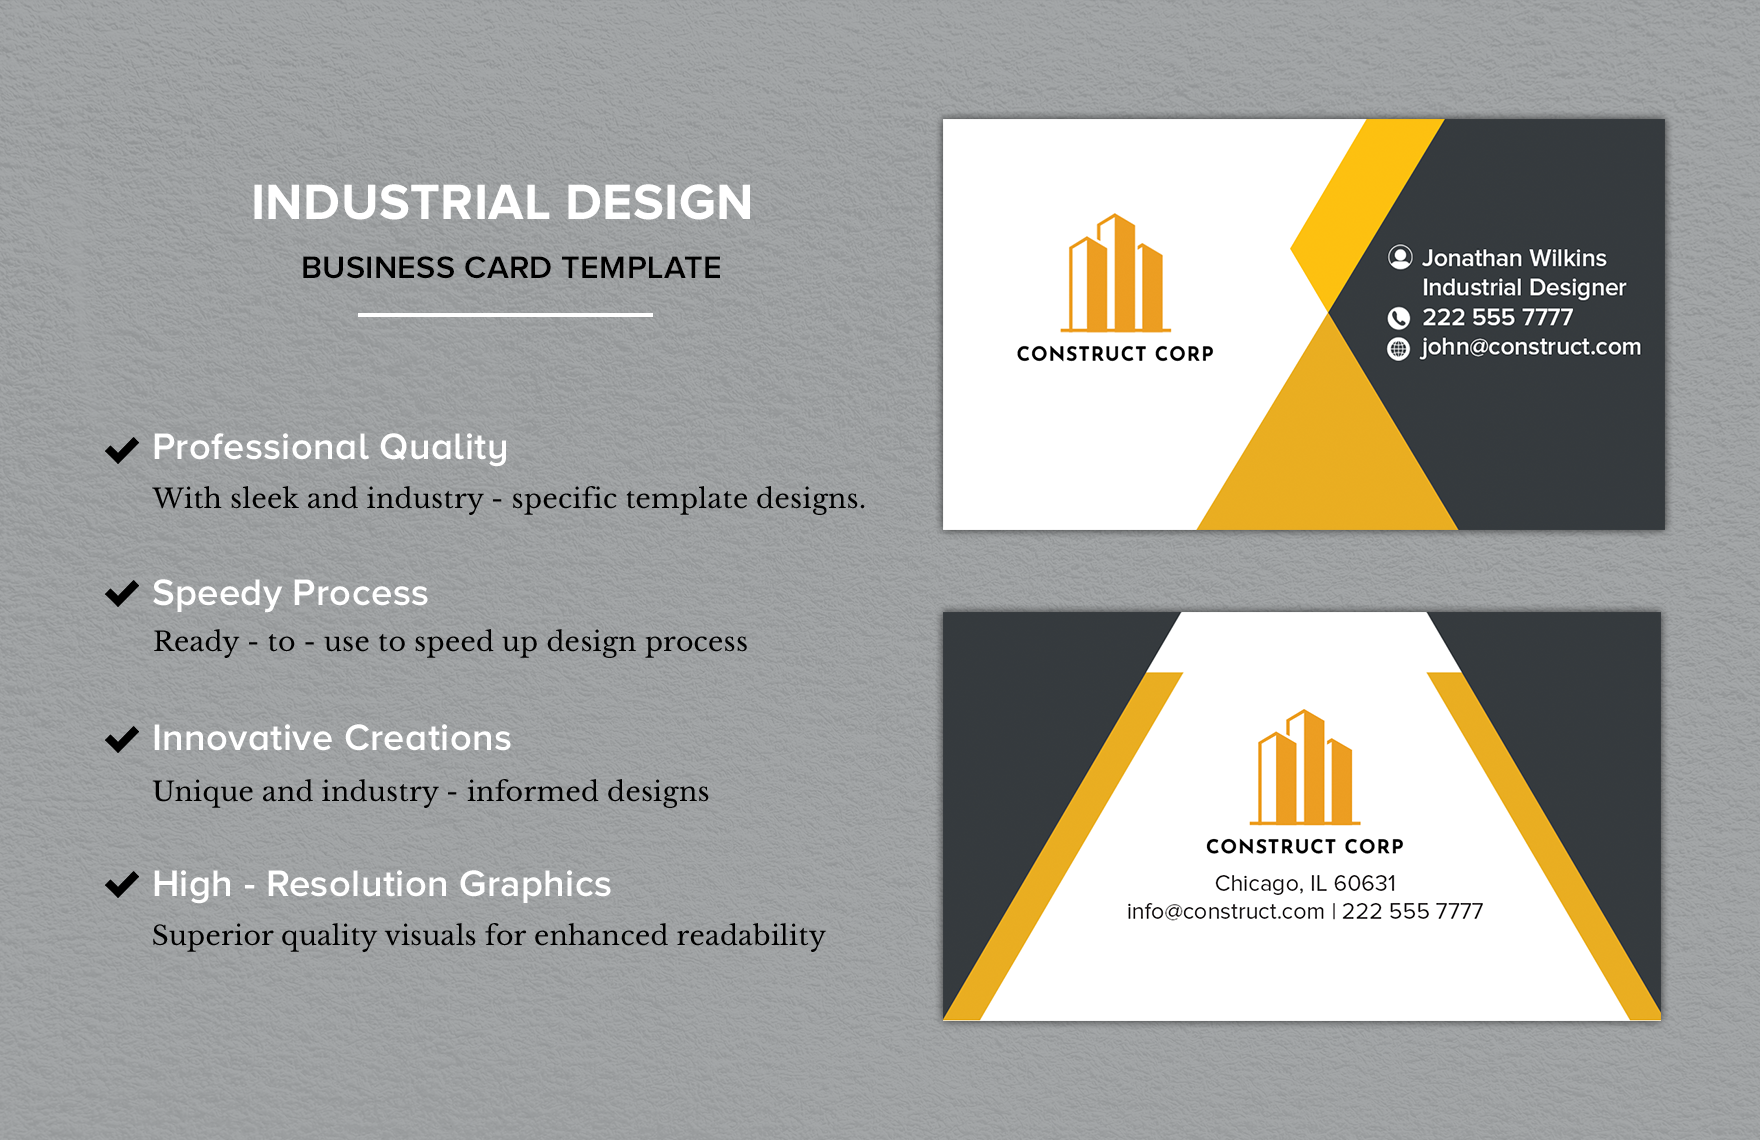 Industrial Design Business Card Template